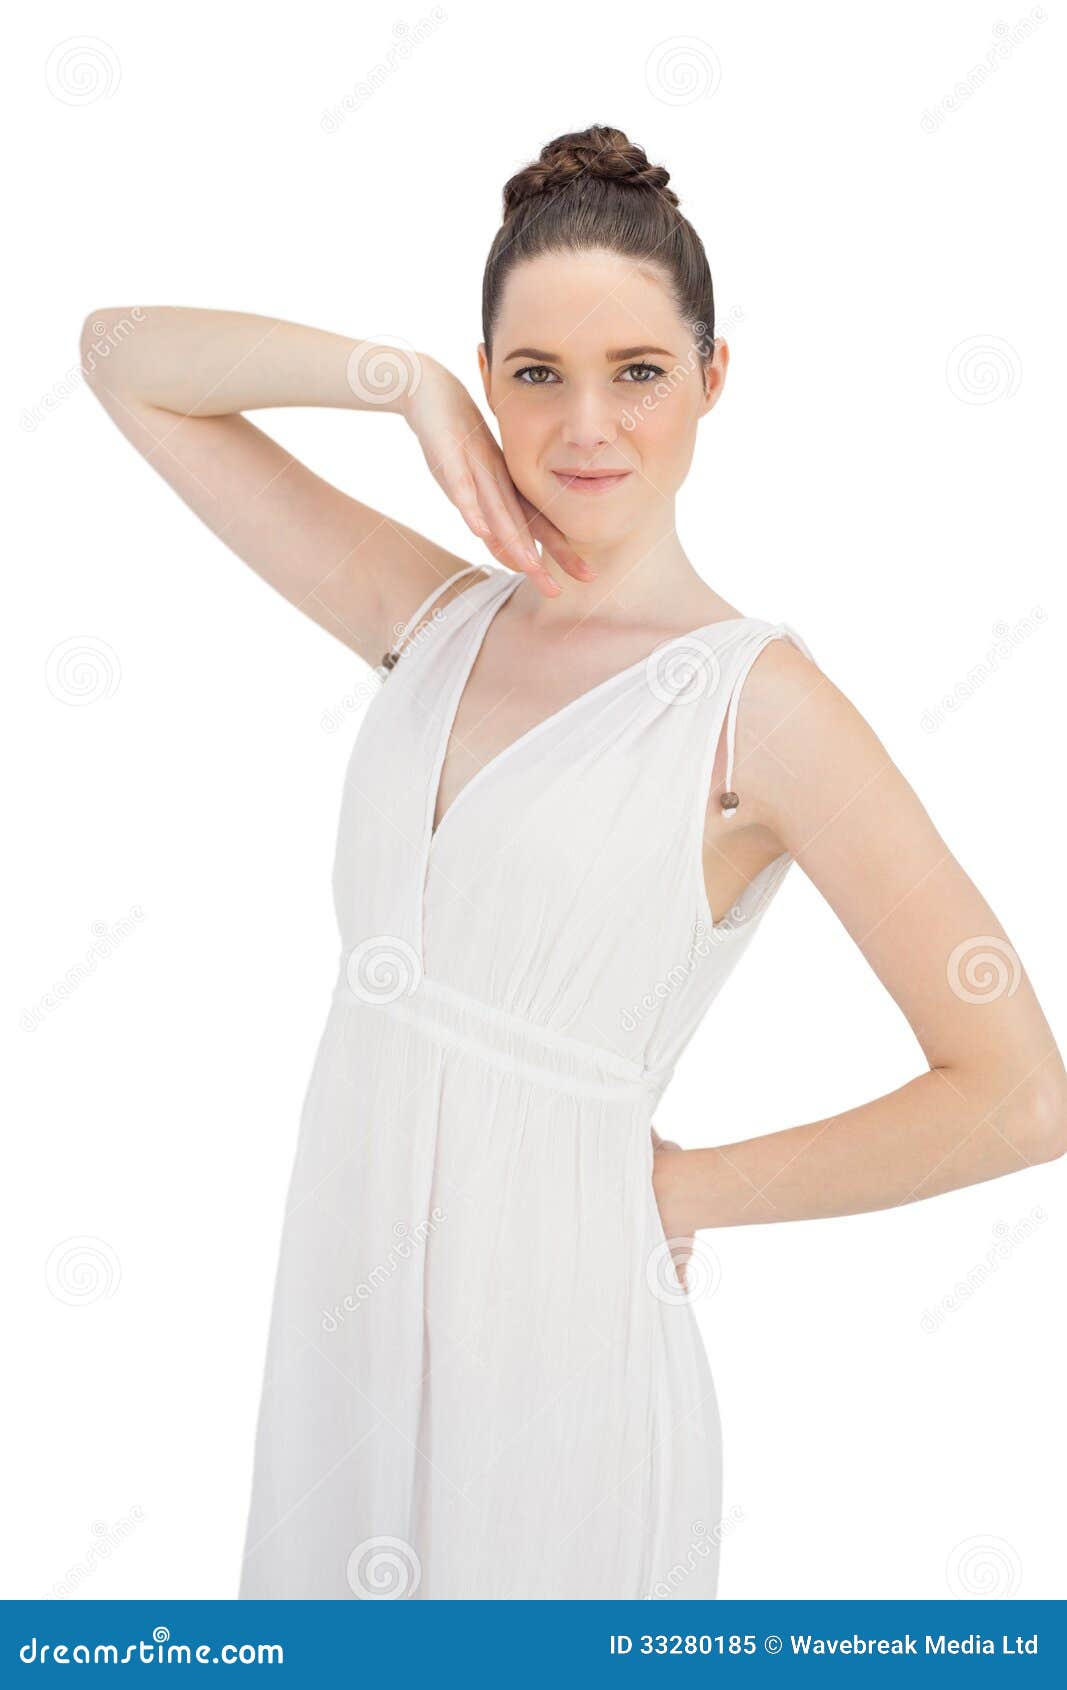 Natural Model In White Dress Posing Stroking Her Face Stock Image Image Of Pale Model 33280185 